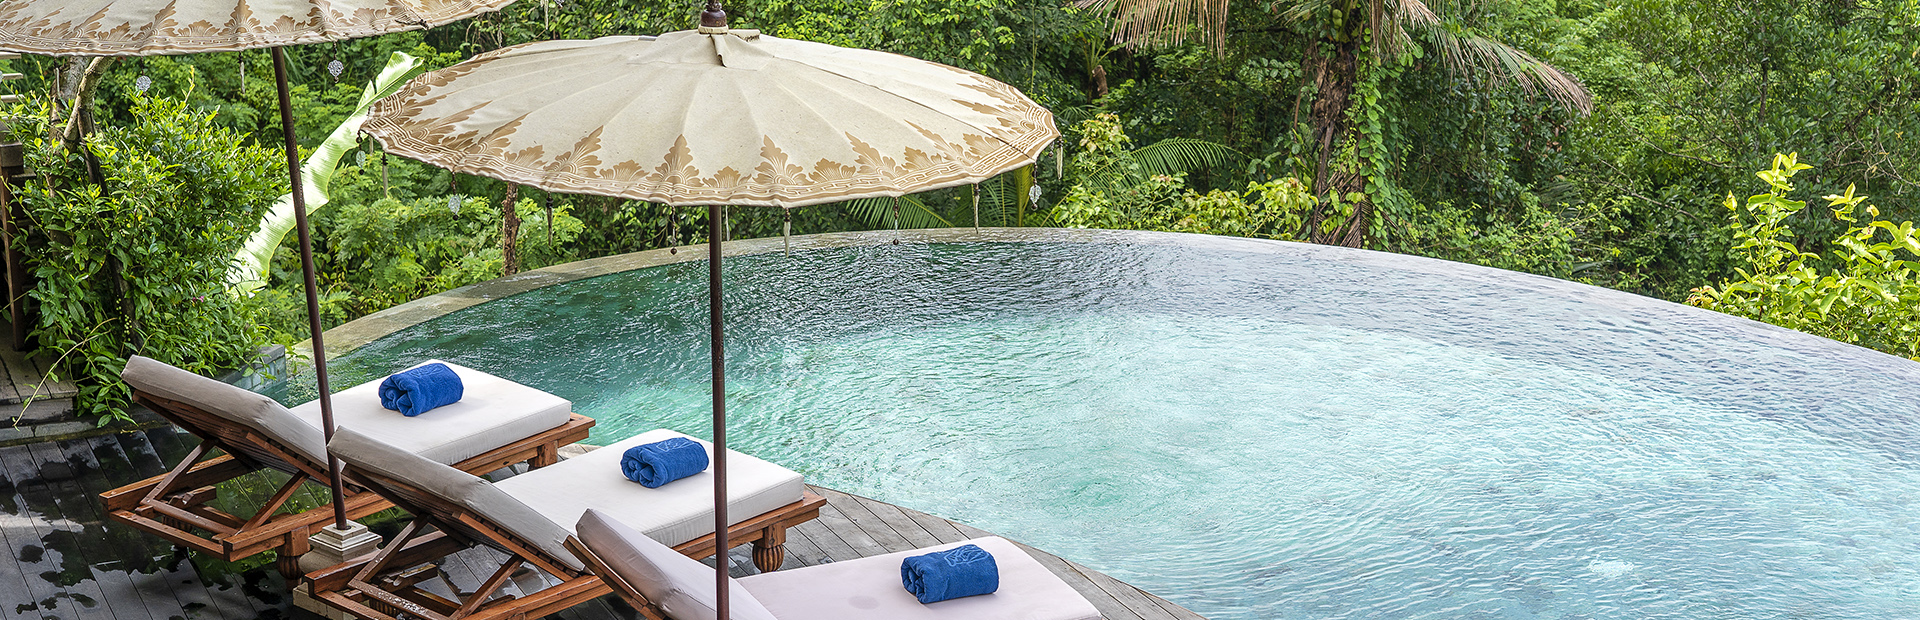 Private drug rehab in Bali features a swimming pool in a tropical jungle